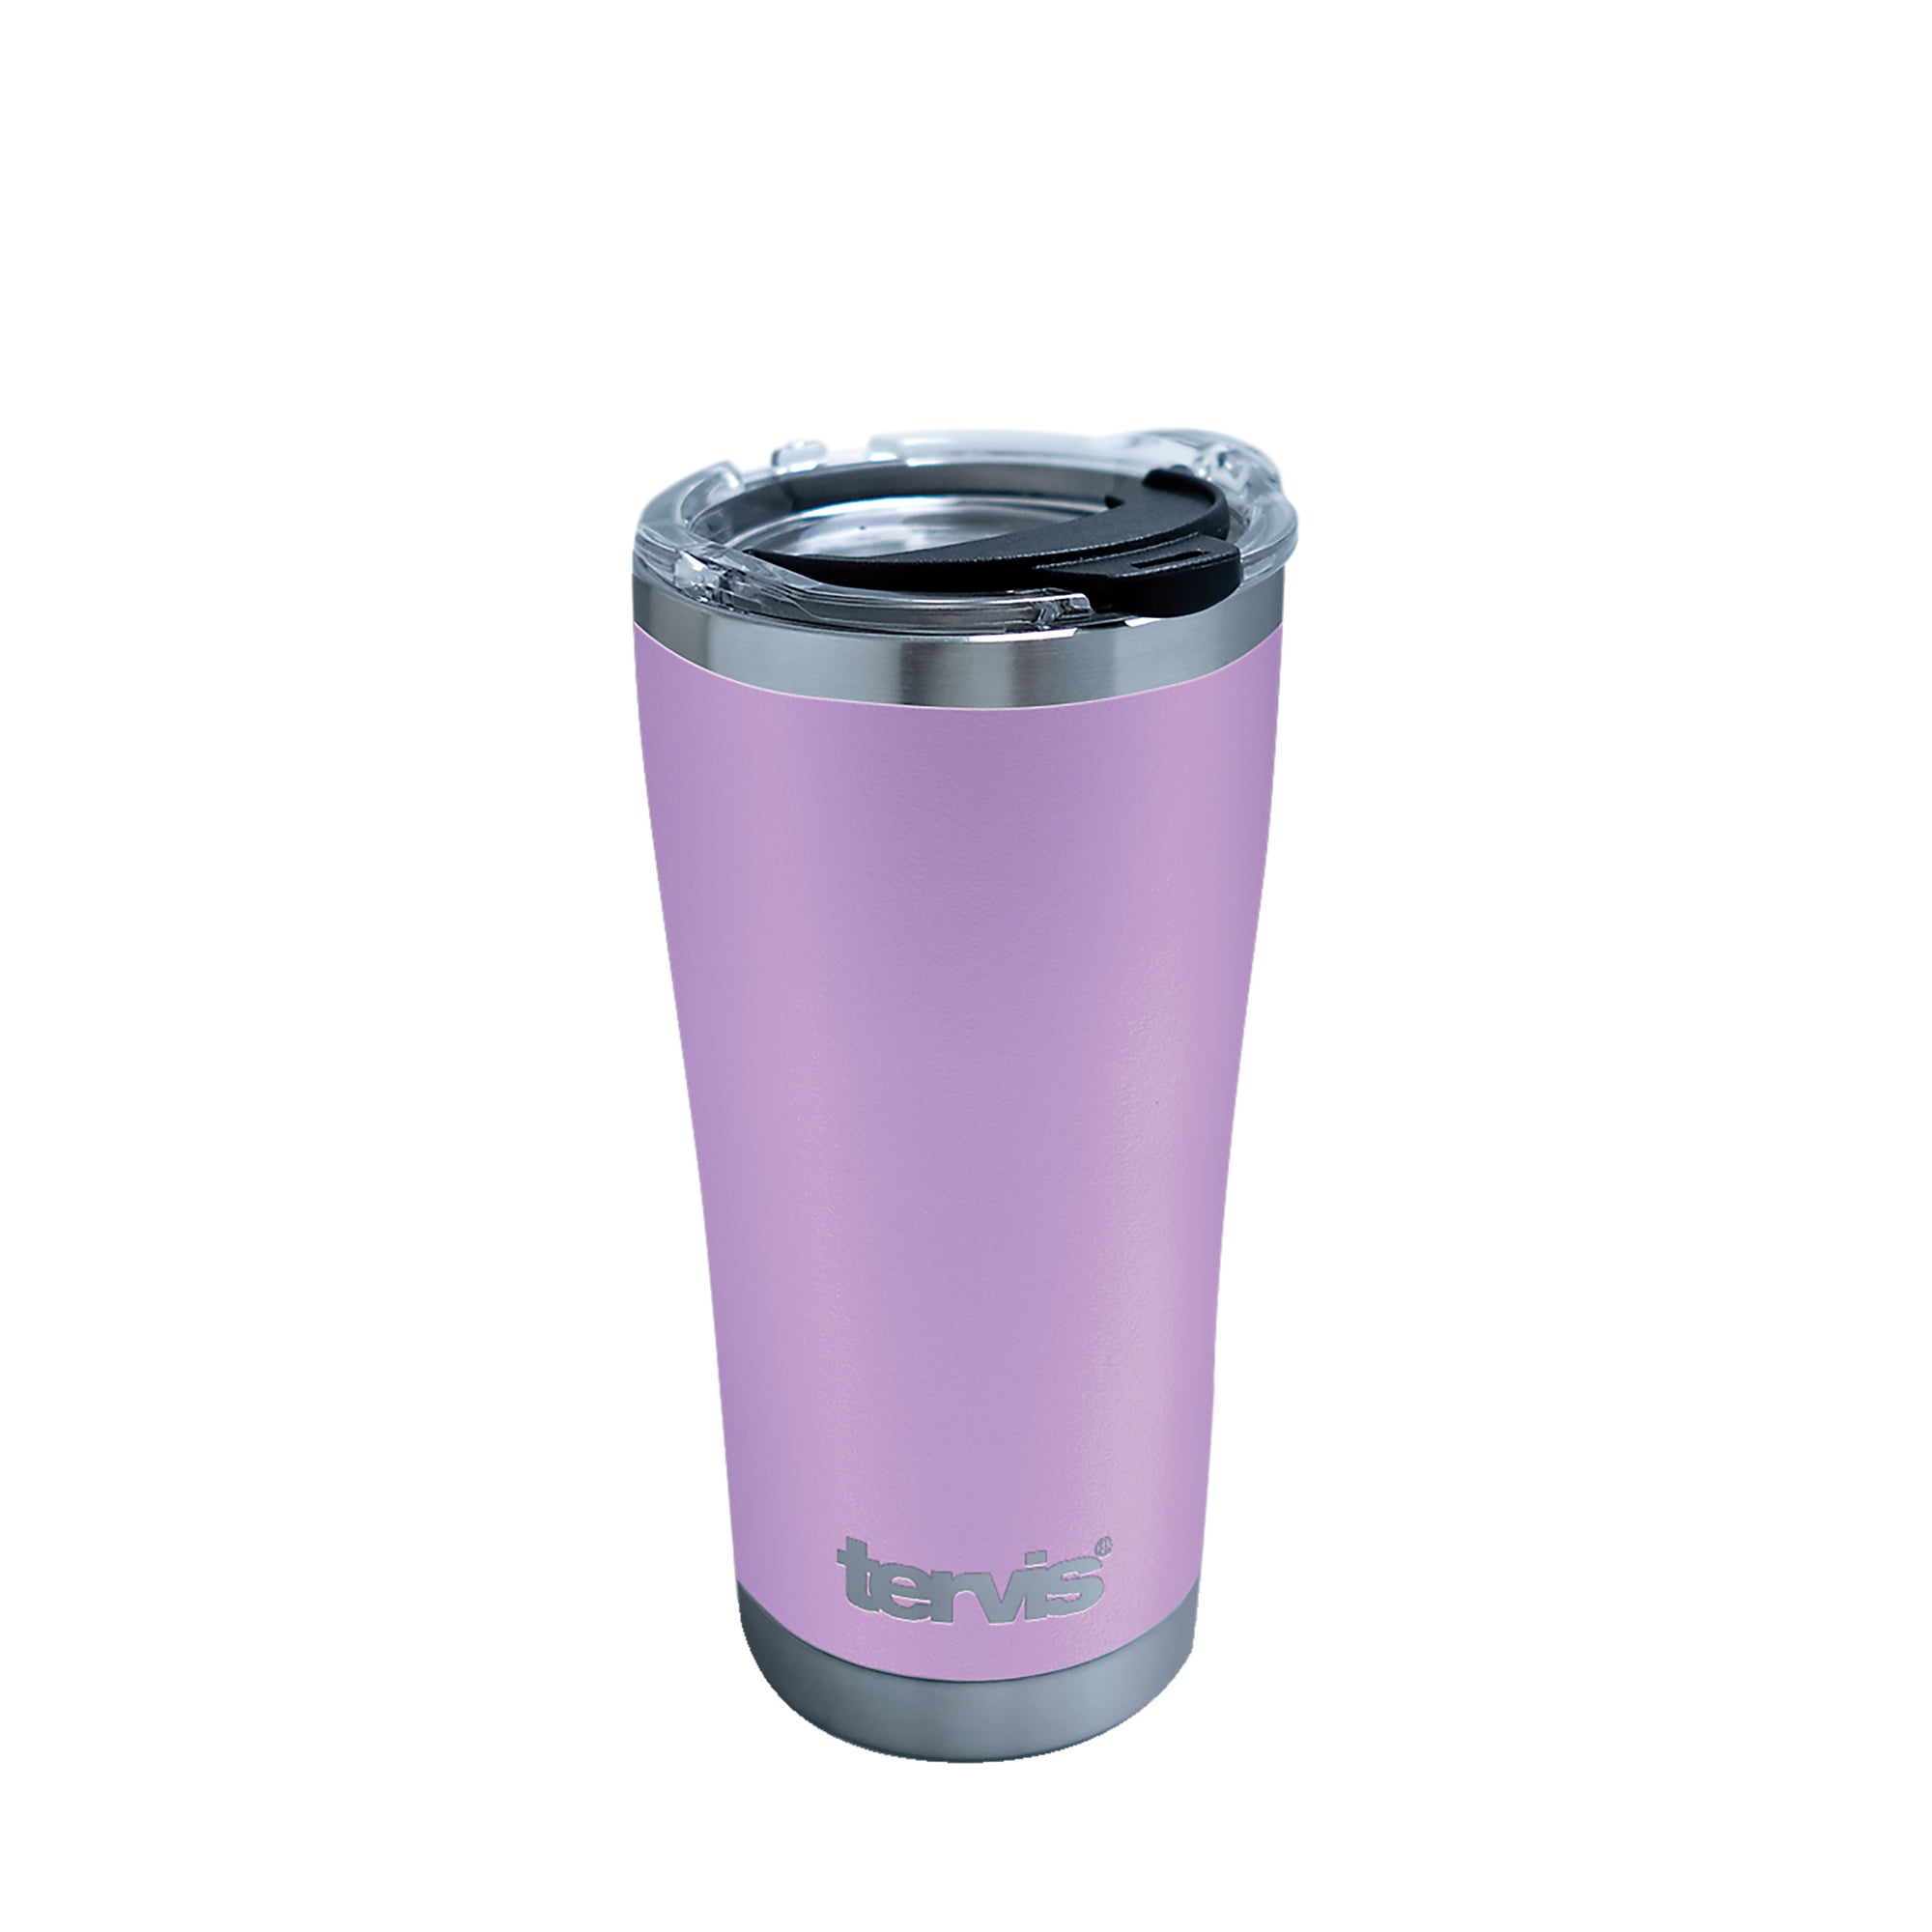 TERVIS Unicorn Stainless Steel Tumbler with Lid 20 Fl Oz 